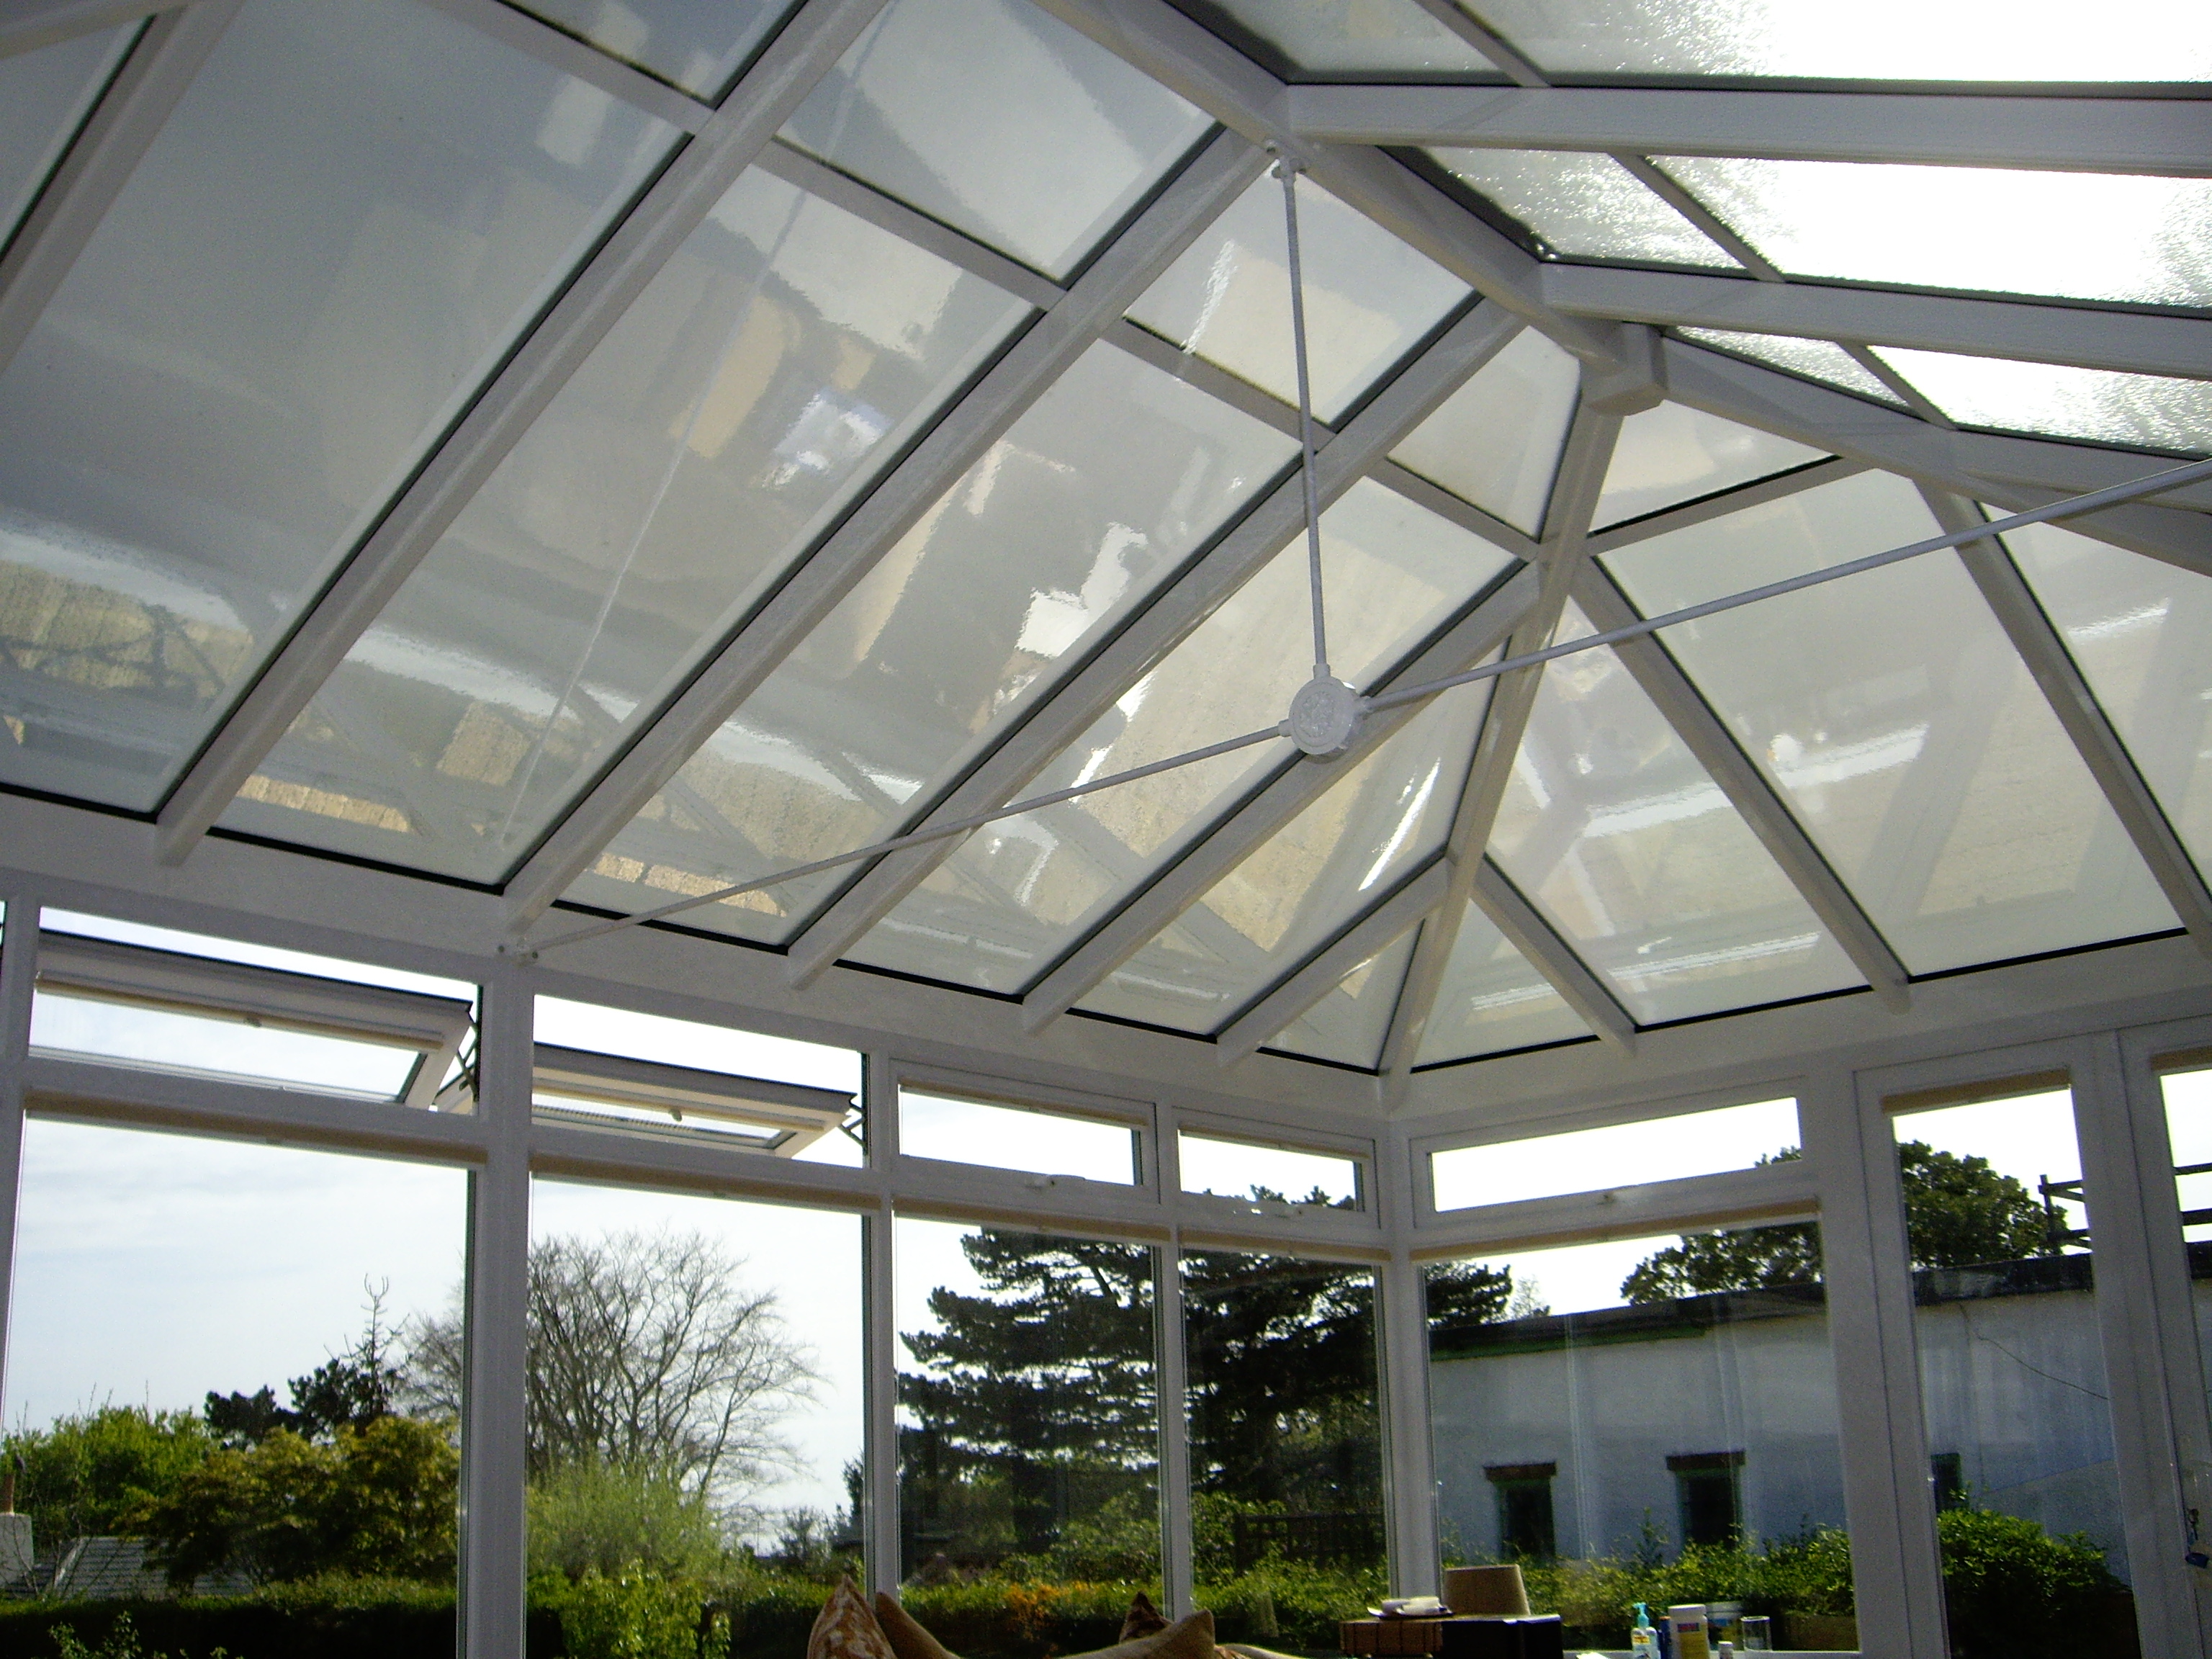 Neutral 30 solar window film applied to frost roof glass in conservatory in Worthing by Tinting Express Ltd